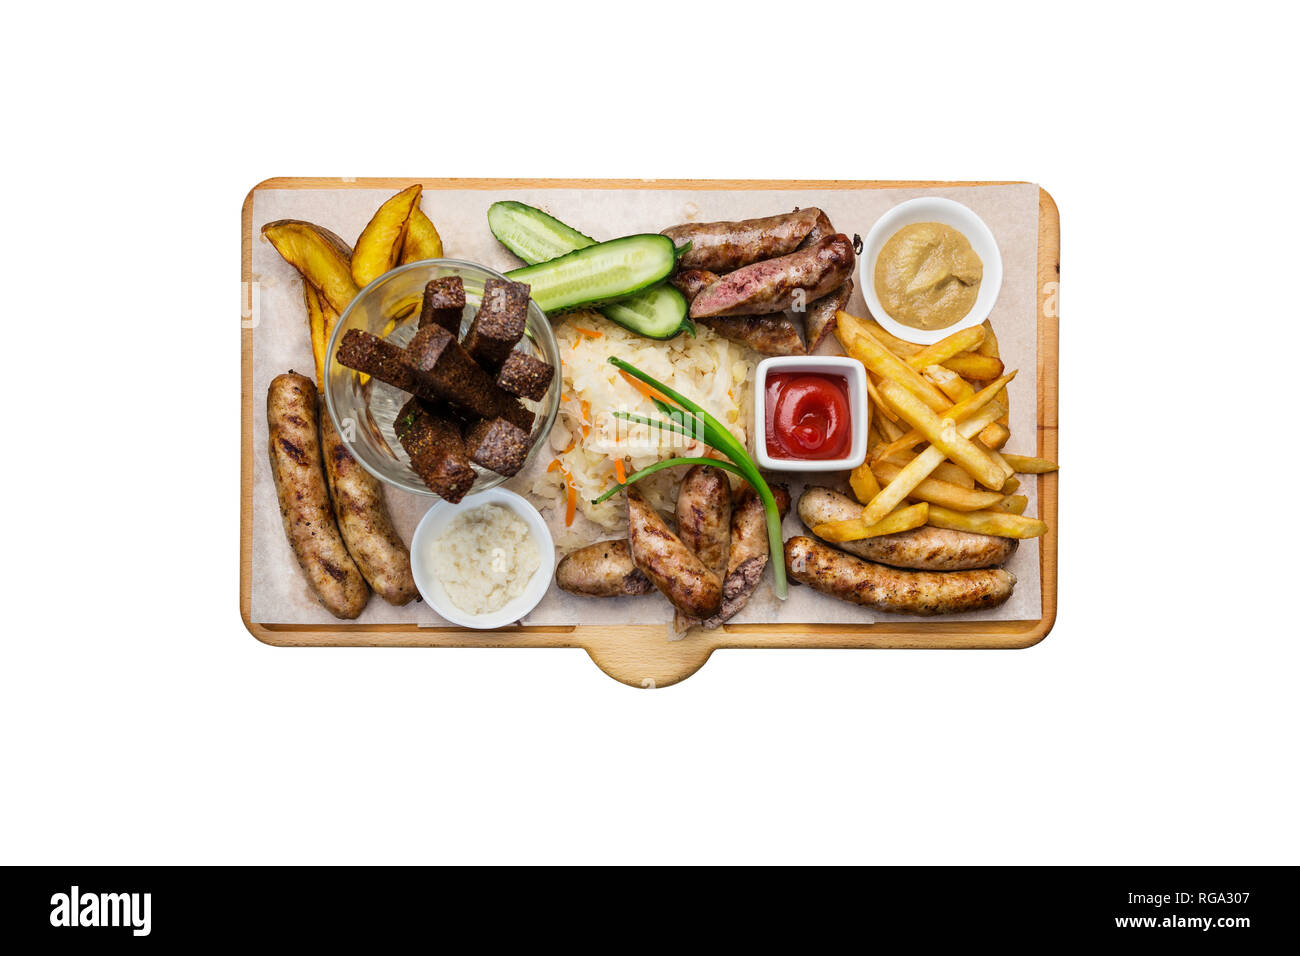 Beer snacks set. Grilled sausages and french fries with tomato and BBQ sauce, served on cutting board. Stock Photo